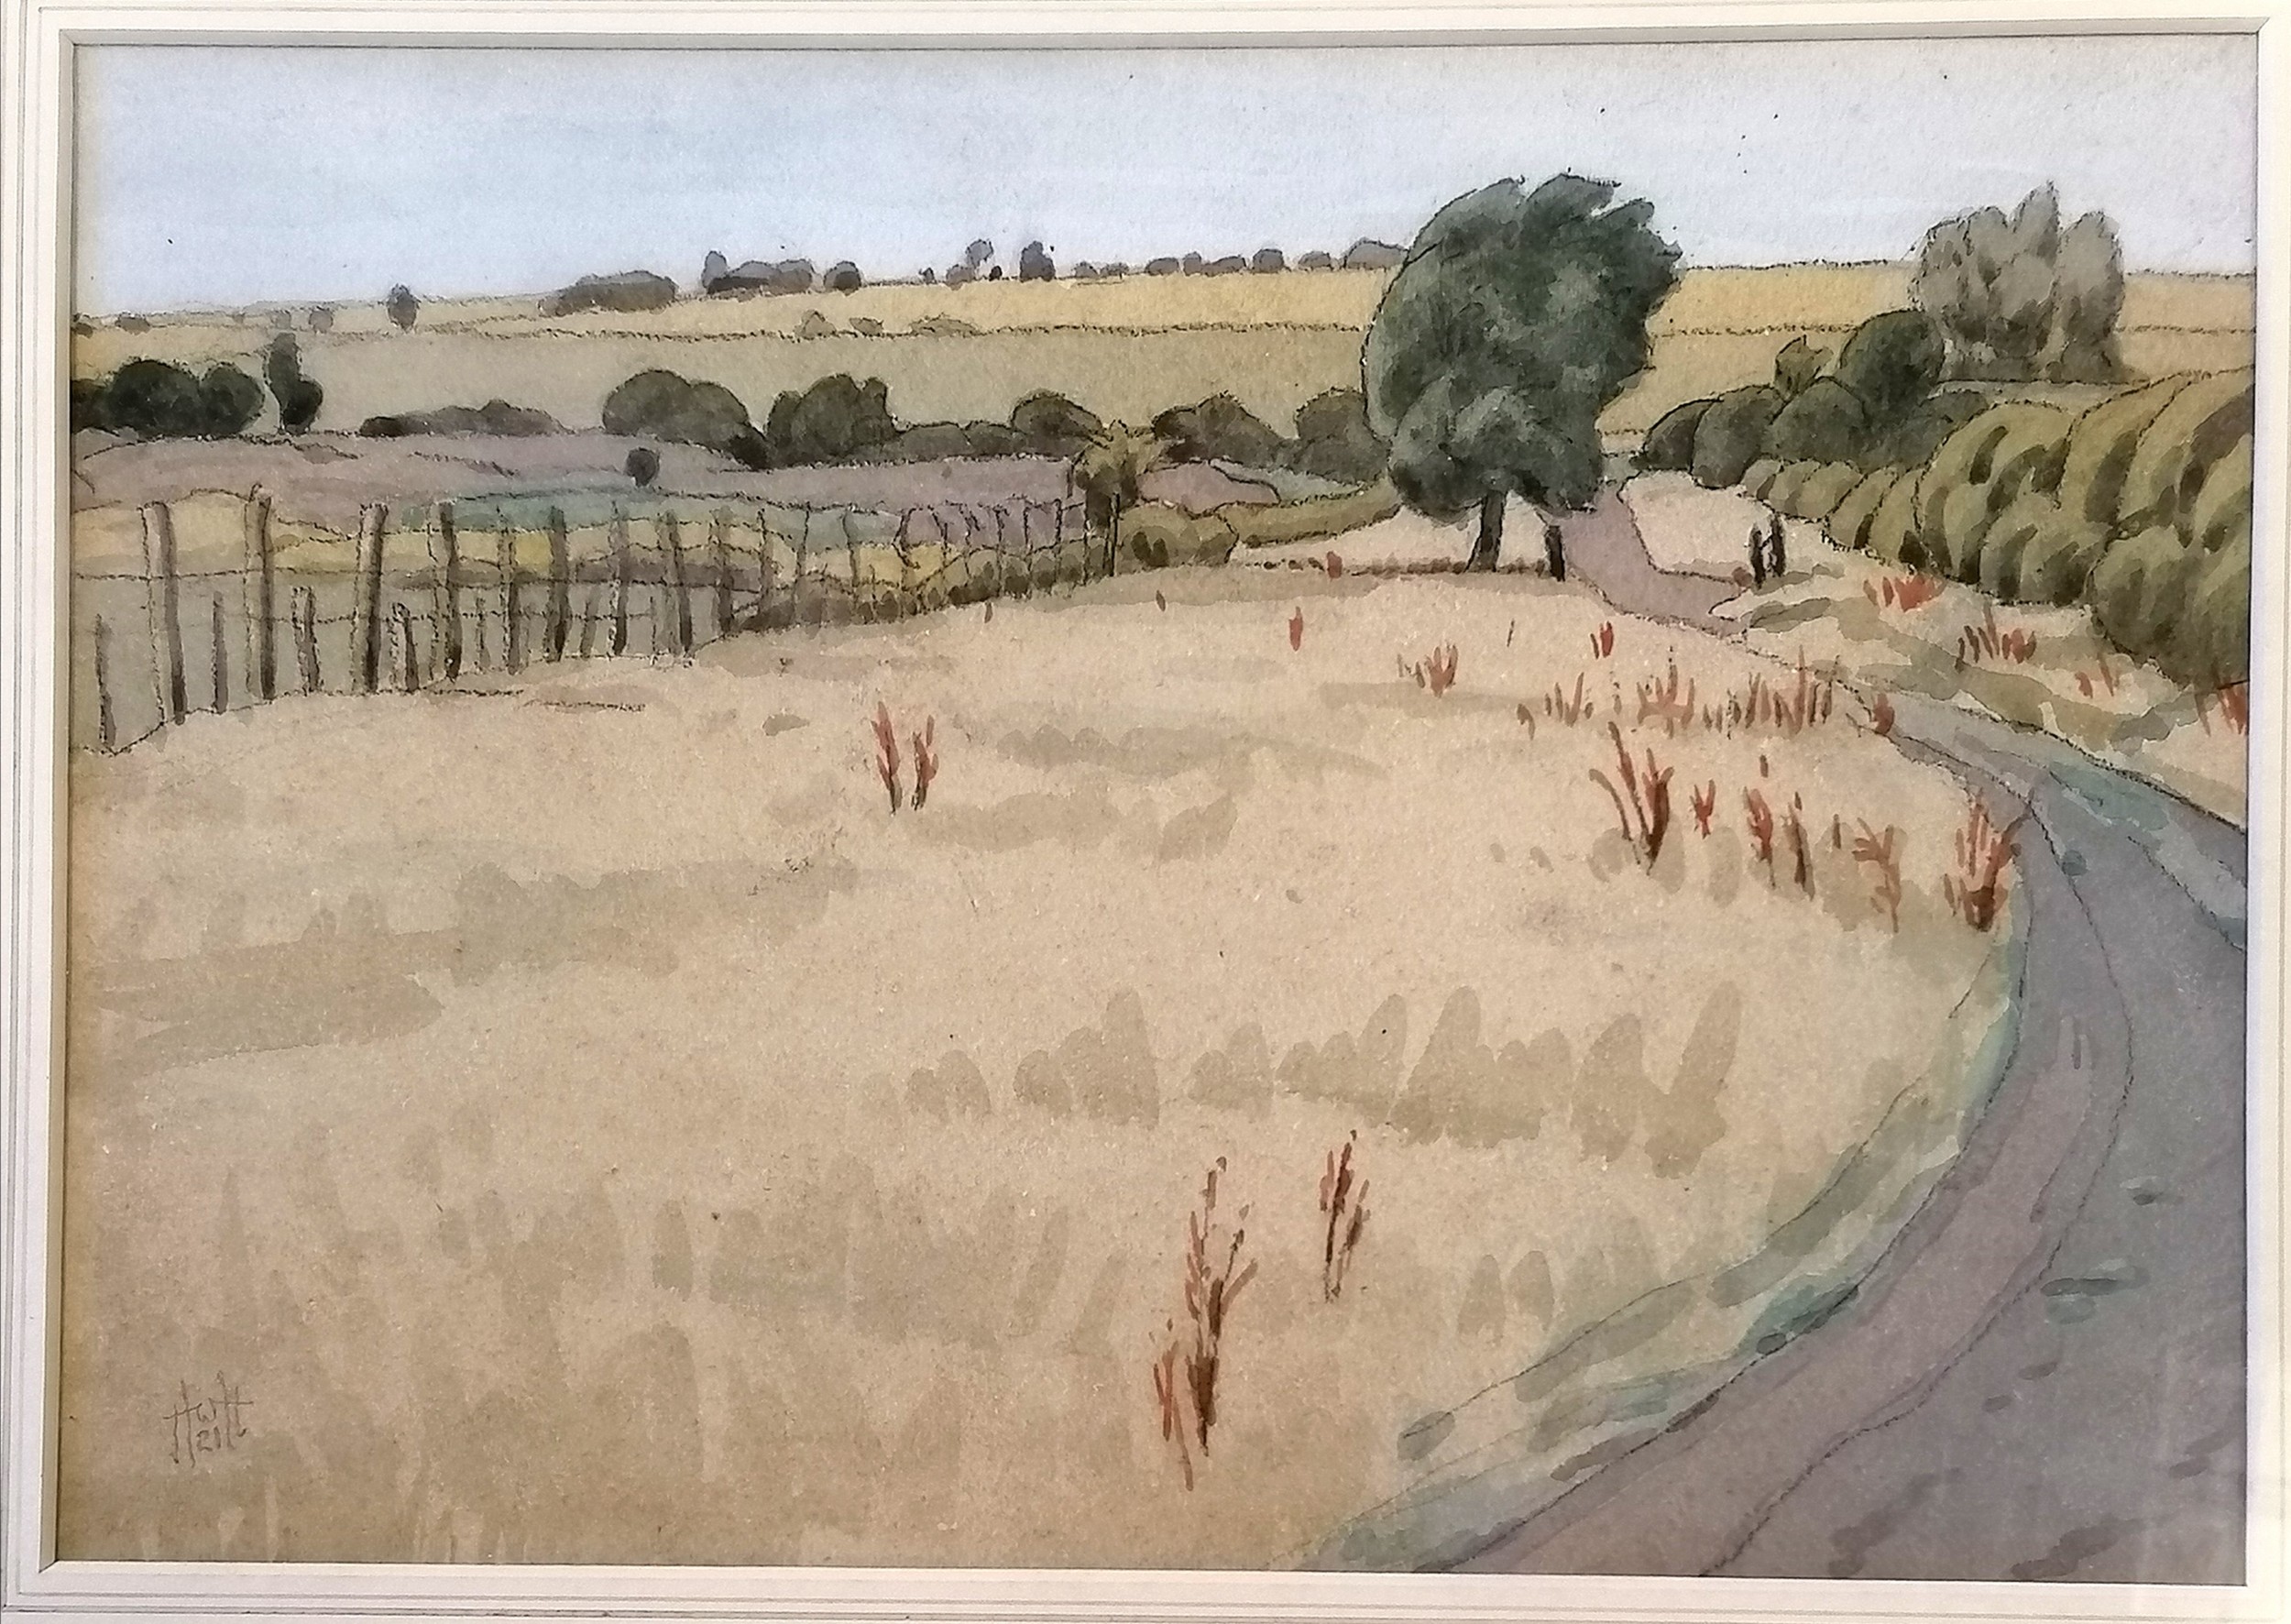 1921 watercolour painting of a rural scene with HWH (?) monogram - frame 45cm x 54cm